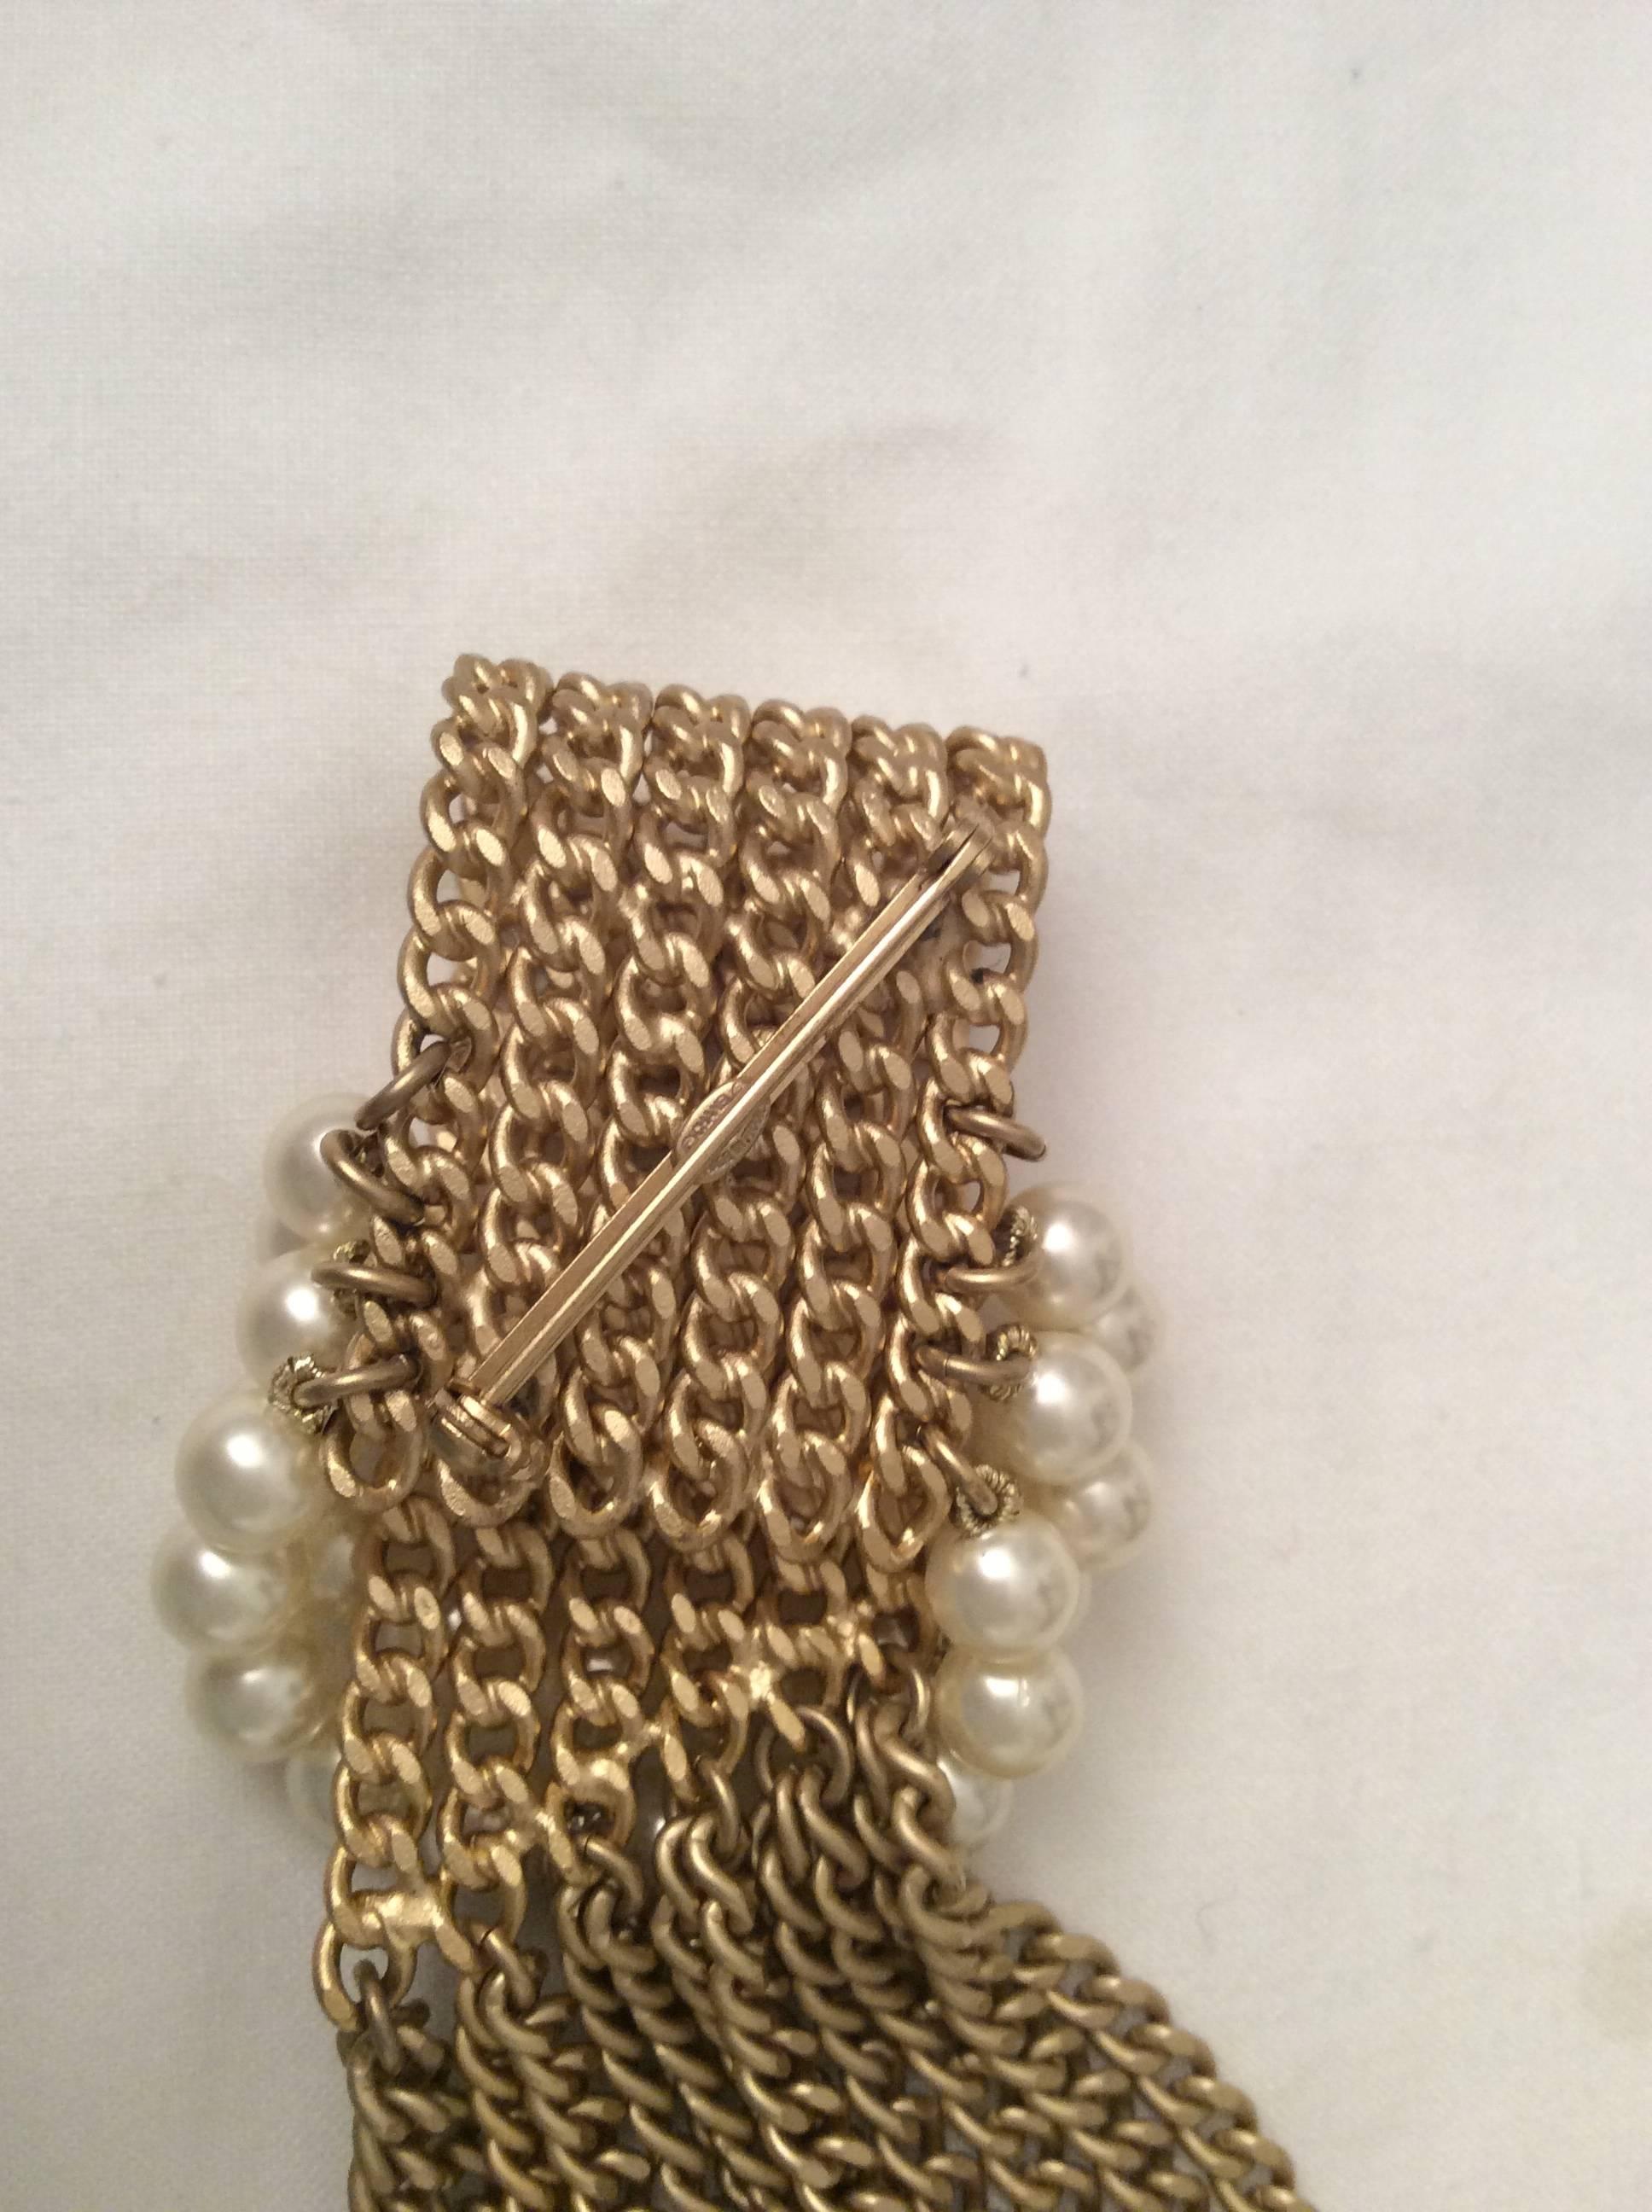 Chanel Pearl, Rhinestone, and Gold Tone Chain Brooch - 1970's In Excellent Condition For Sale In Boca Raton, FL